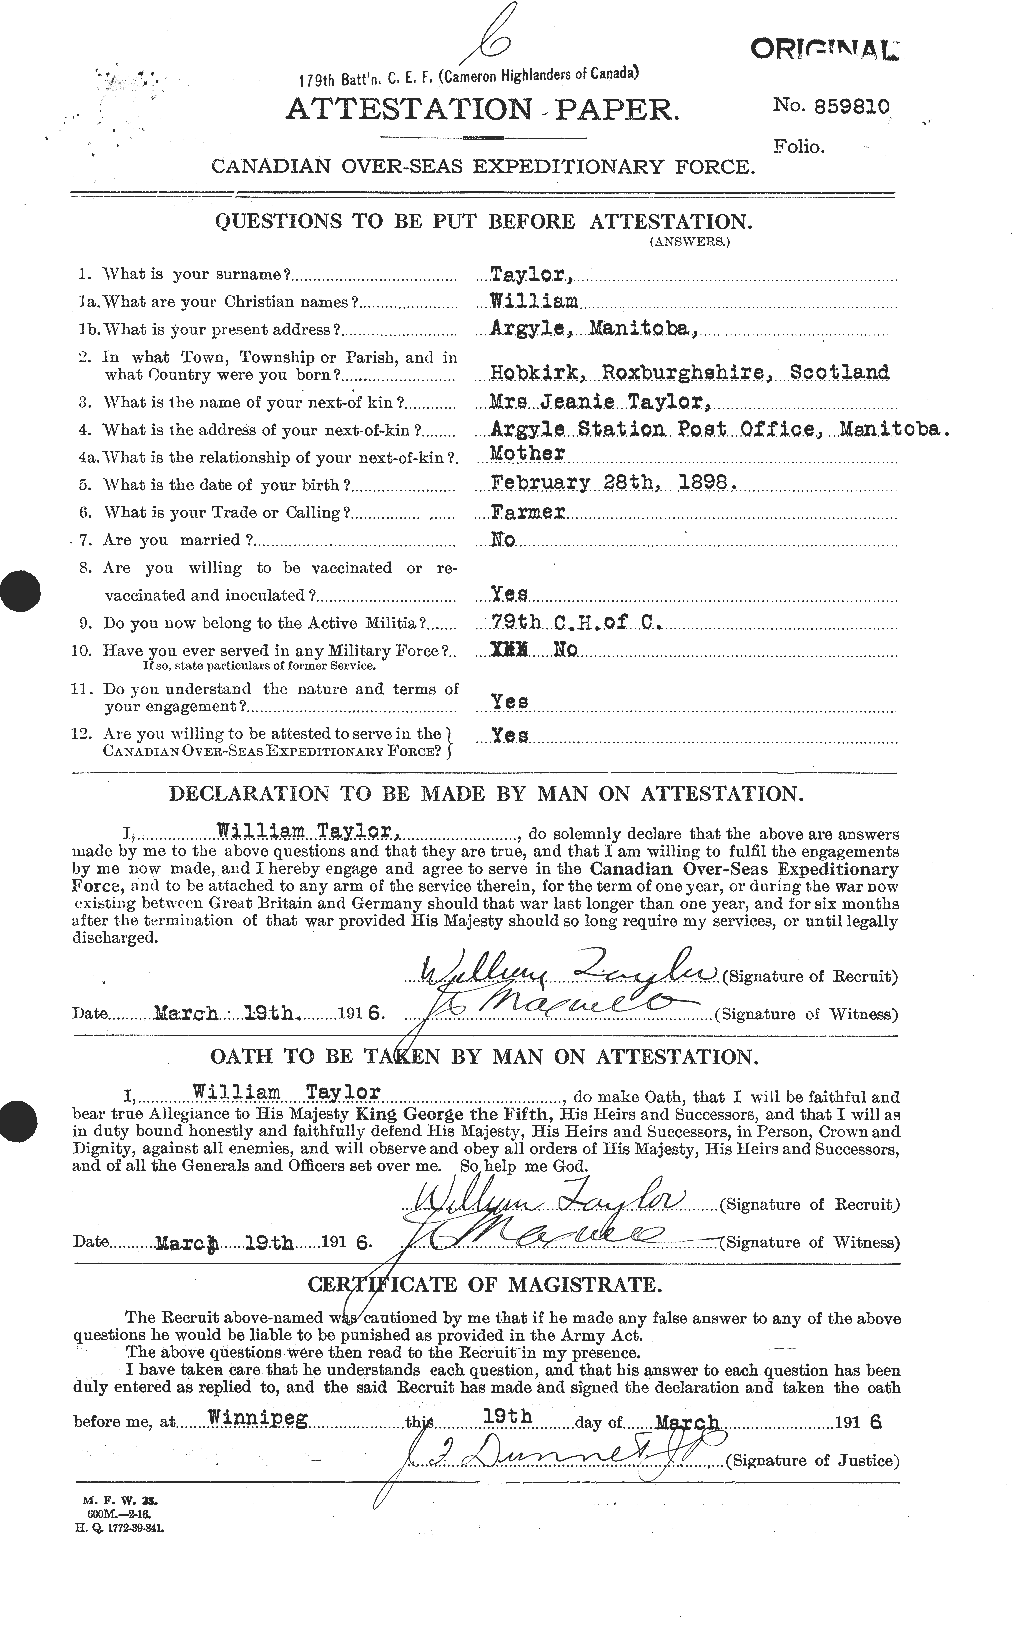 Personnel Records of the First World War - CEF 628191a